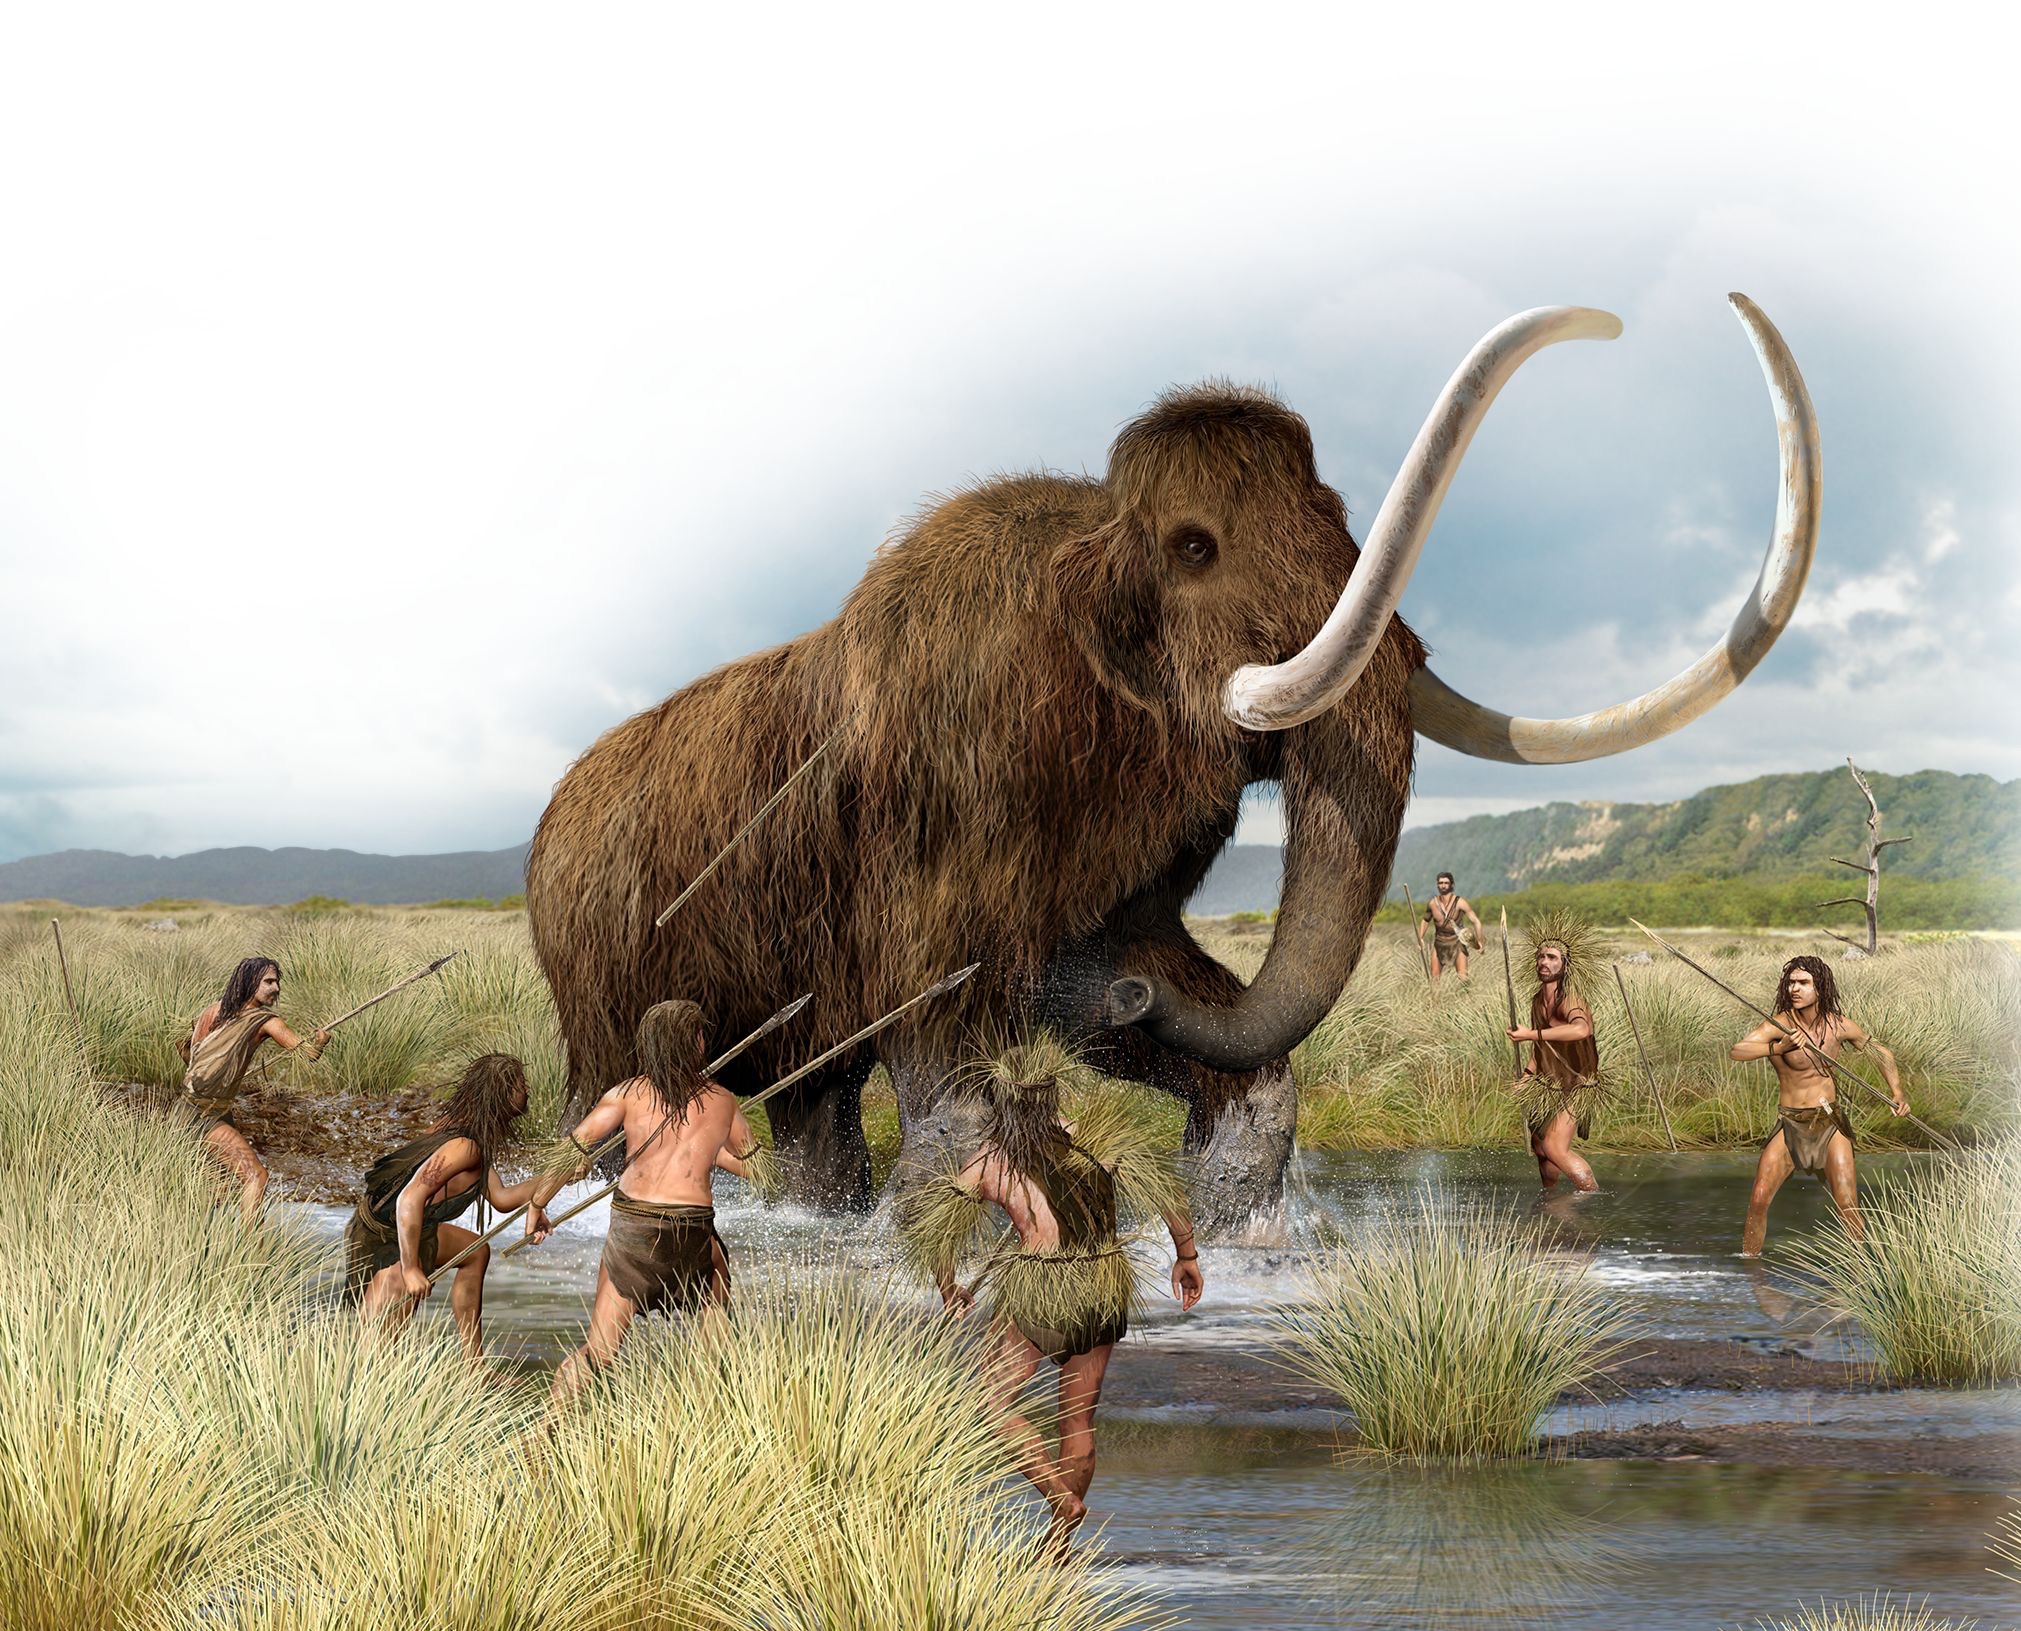 Hunter / gatherers attack a wooly mammoth